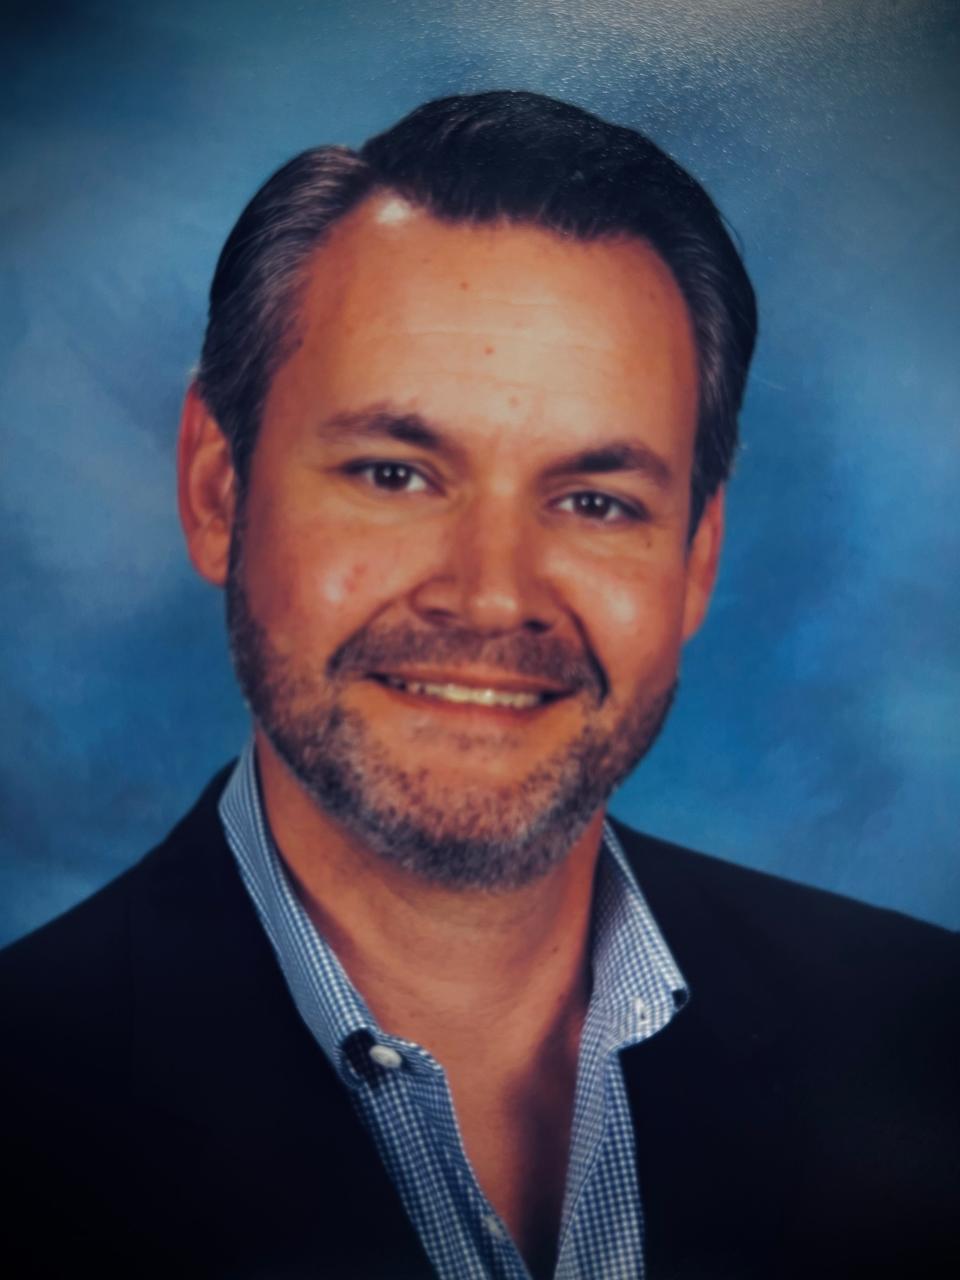 Werner “Bucky” Hartman has been named principal of Kaffie Middle School for the 2022-2023 school year.